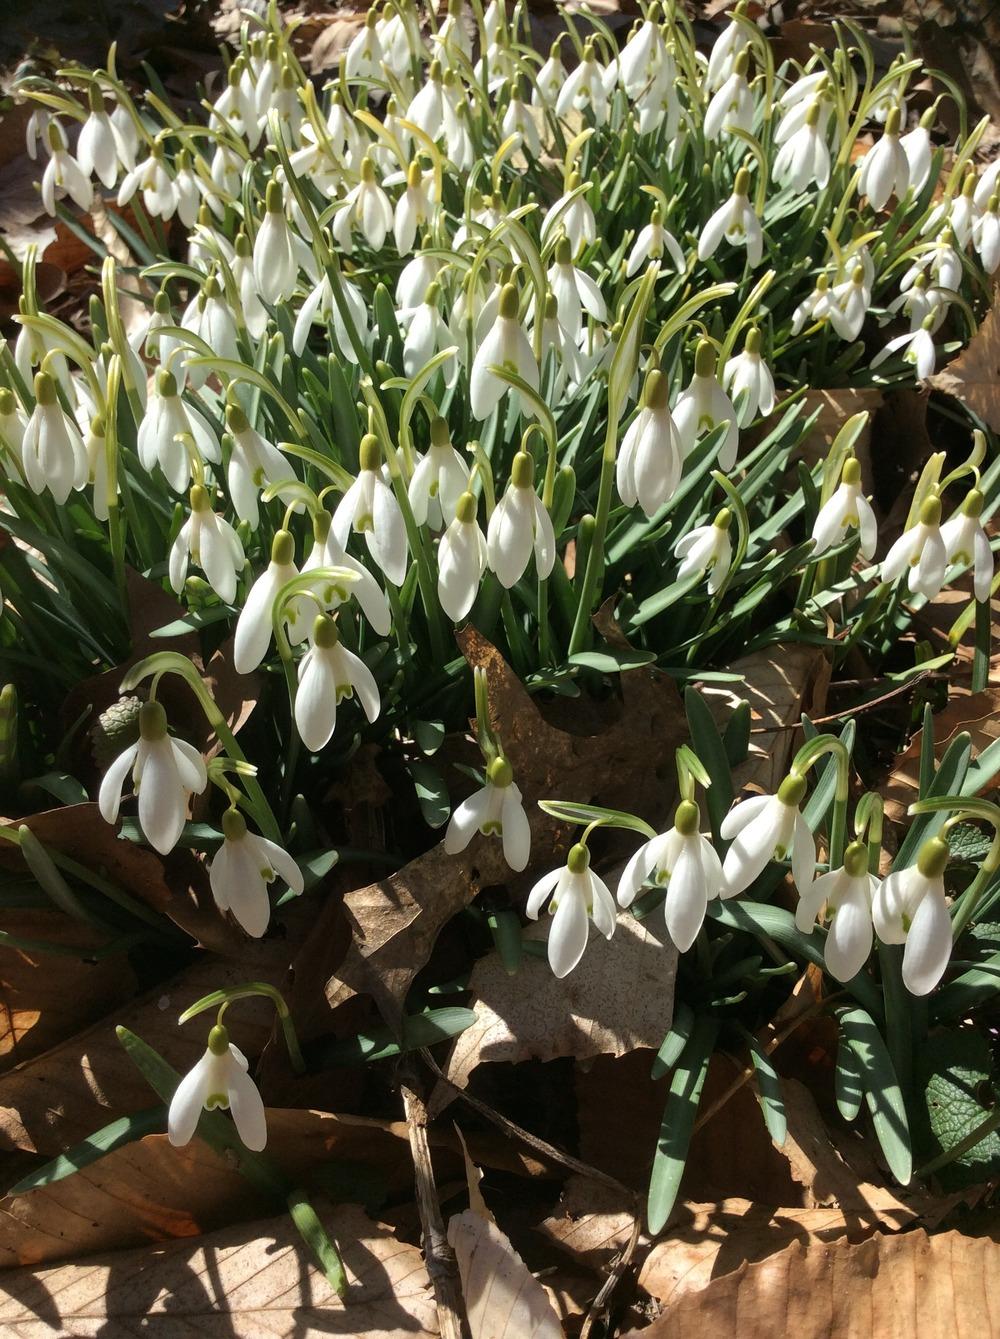 Photo of Snowdrop (Galanthus nivalis) uploaded by Ursula